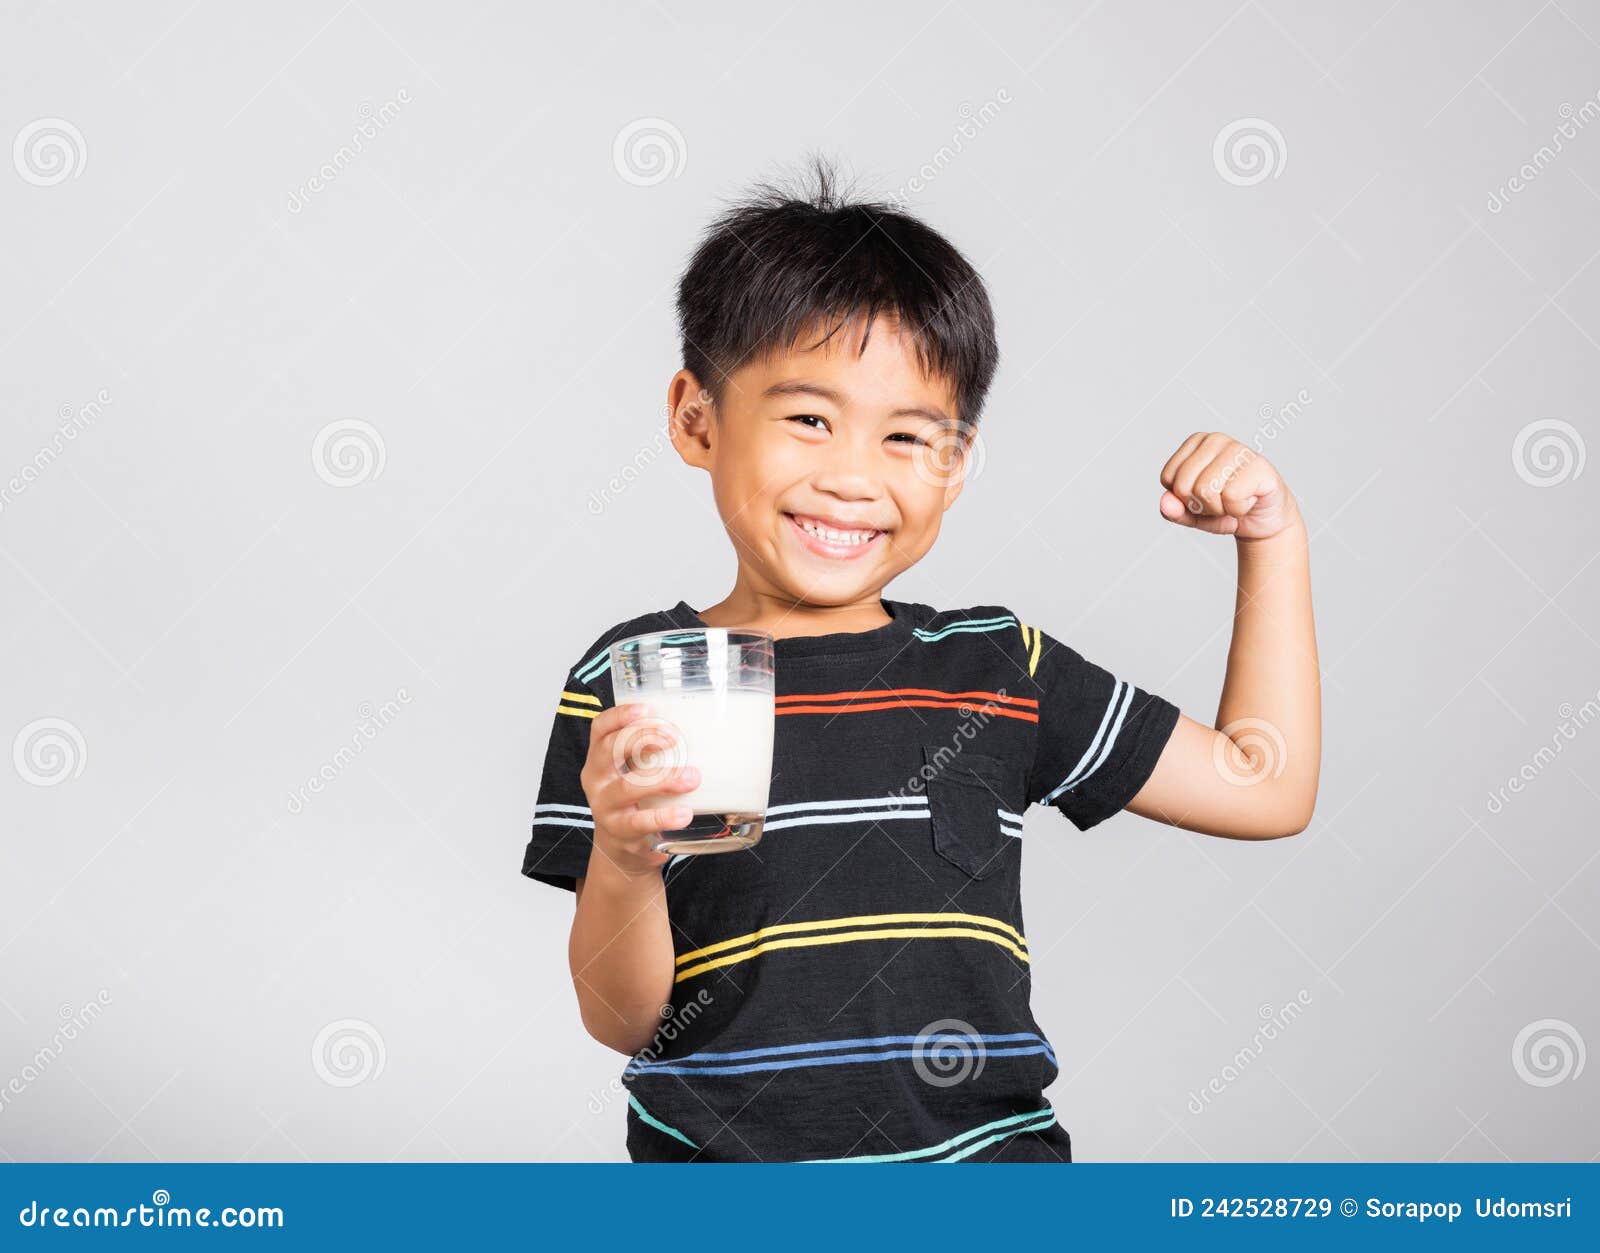 Little Cute Kid Boy 5-6 Years Old Smile Holding Milk Glass and Show ...